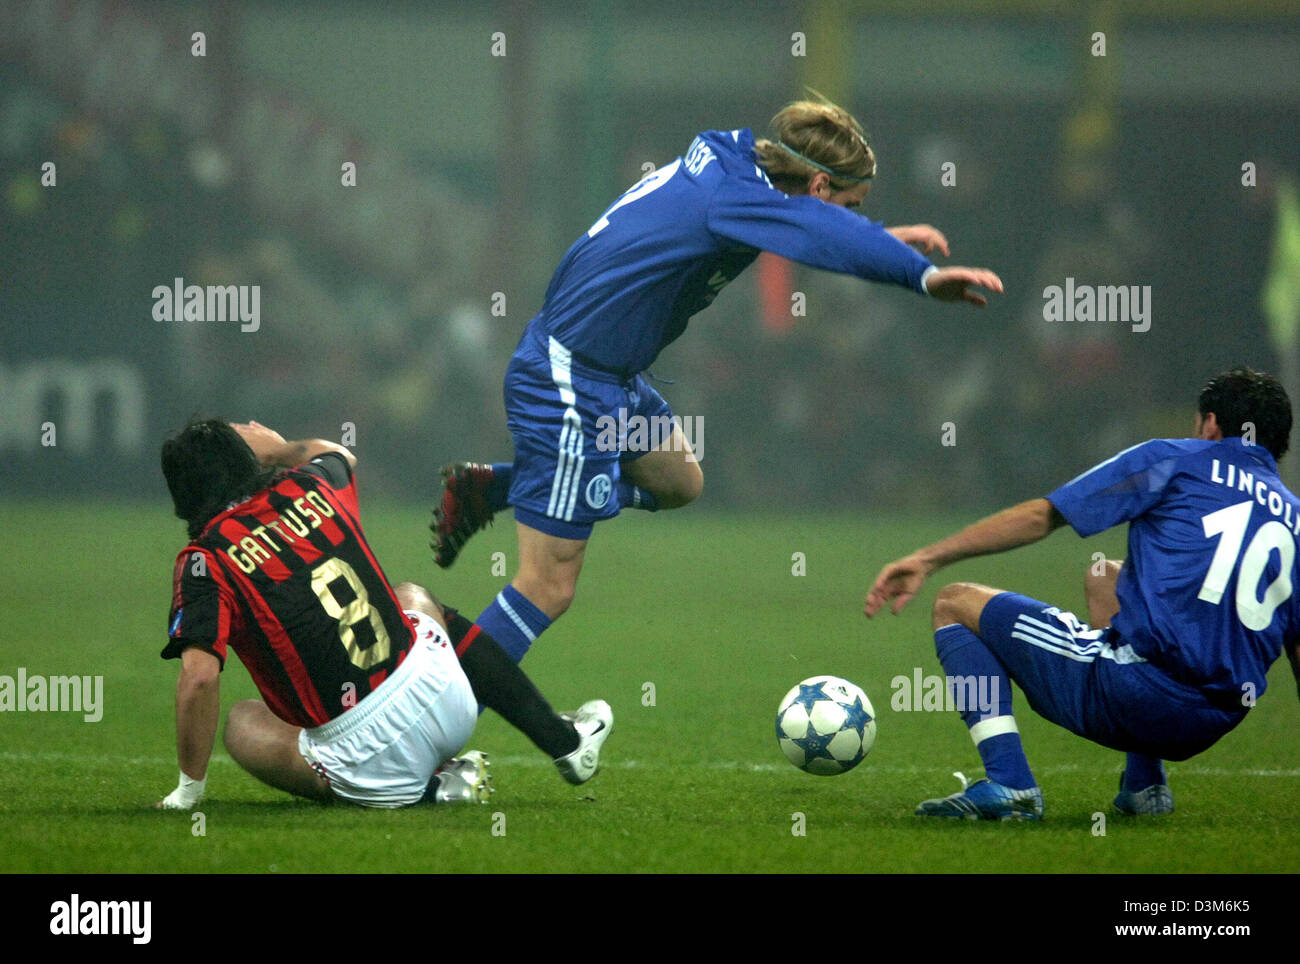 Bunke af medier Løft dig op dpa) - FC Schalke 04 midfielder Christian Poulsen (C) is tackled by AC  Milan's Gennaro Gattuso (L) during the UEFA Champions League first round  final match against AC Milan at the Guiseppe